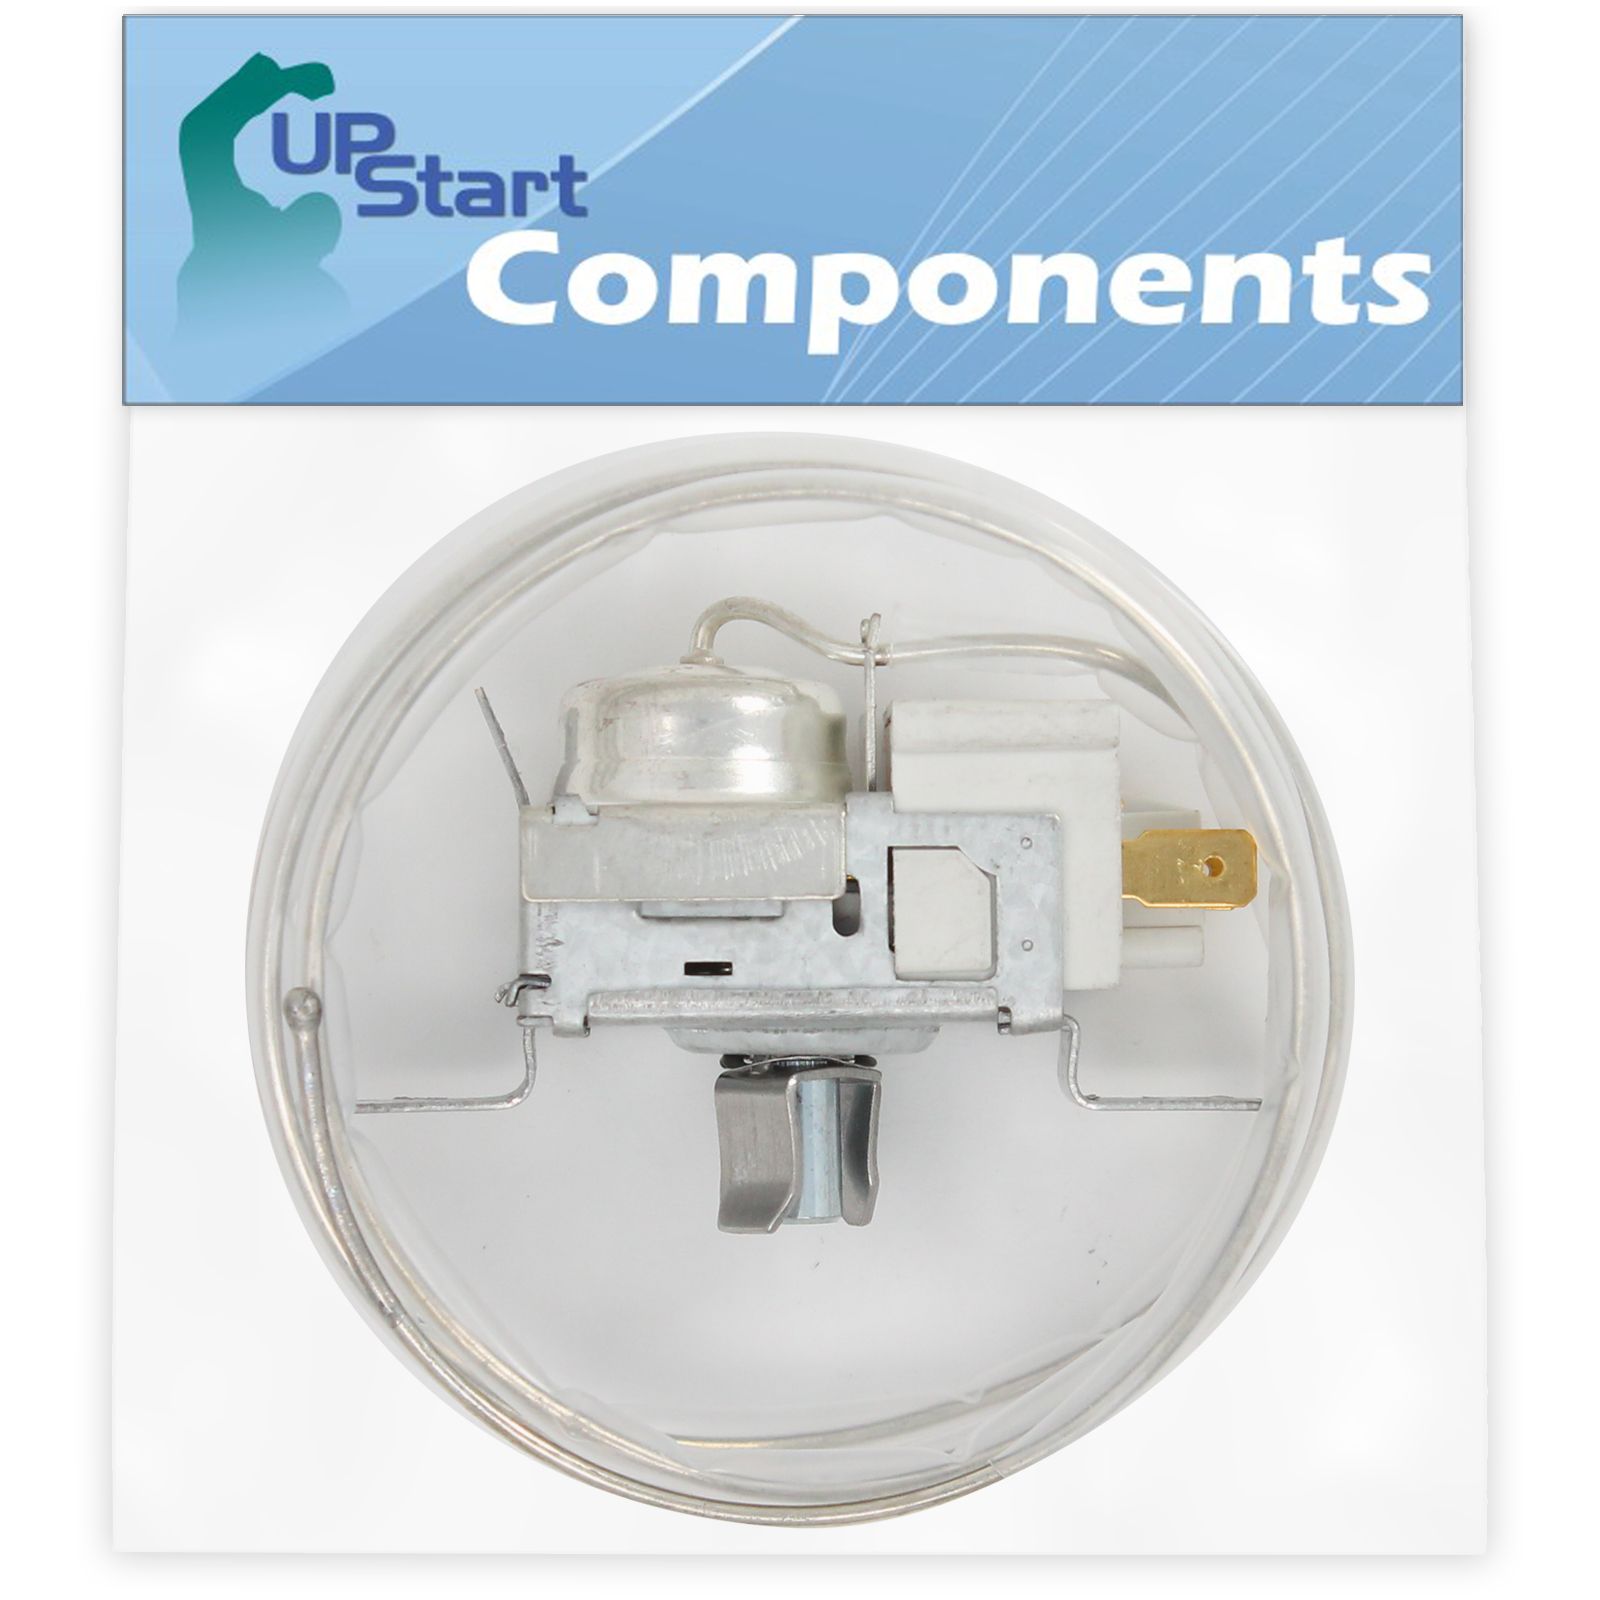 2198202 Cold Control Thermostat Replacement for Whirlpool 7GS6SHAXKT02 Refrigerator - Compatible with WP2198202 Refrigerator Temperature Control Thermostat - UpStart Components Brand - image 1 of 3